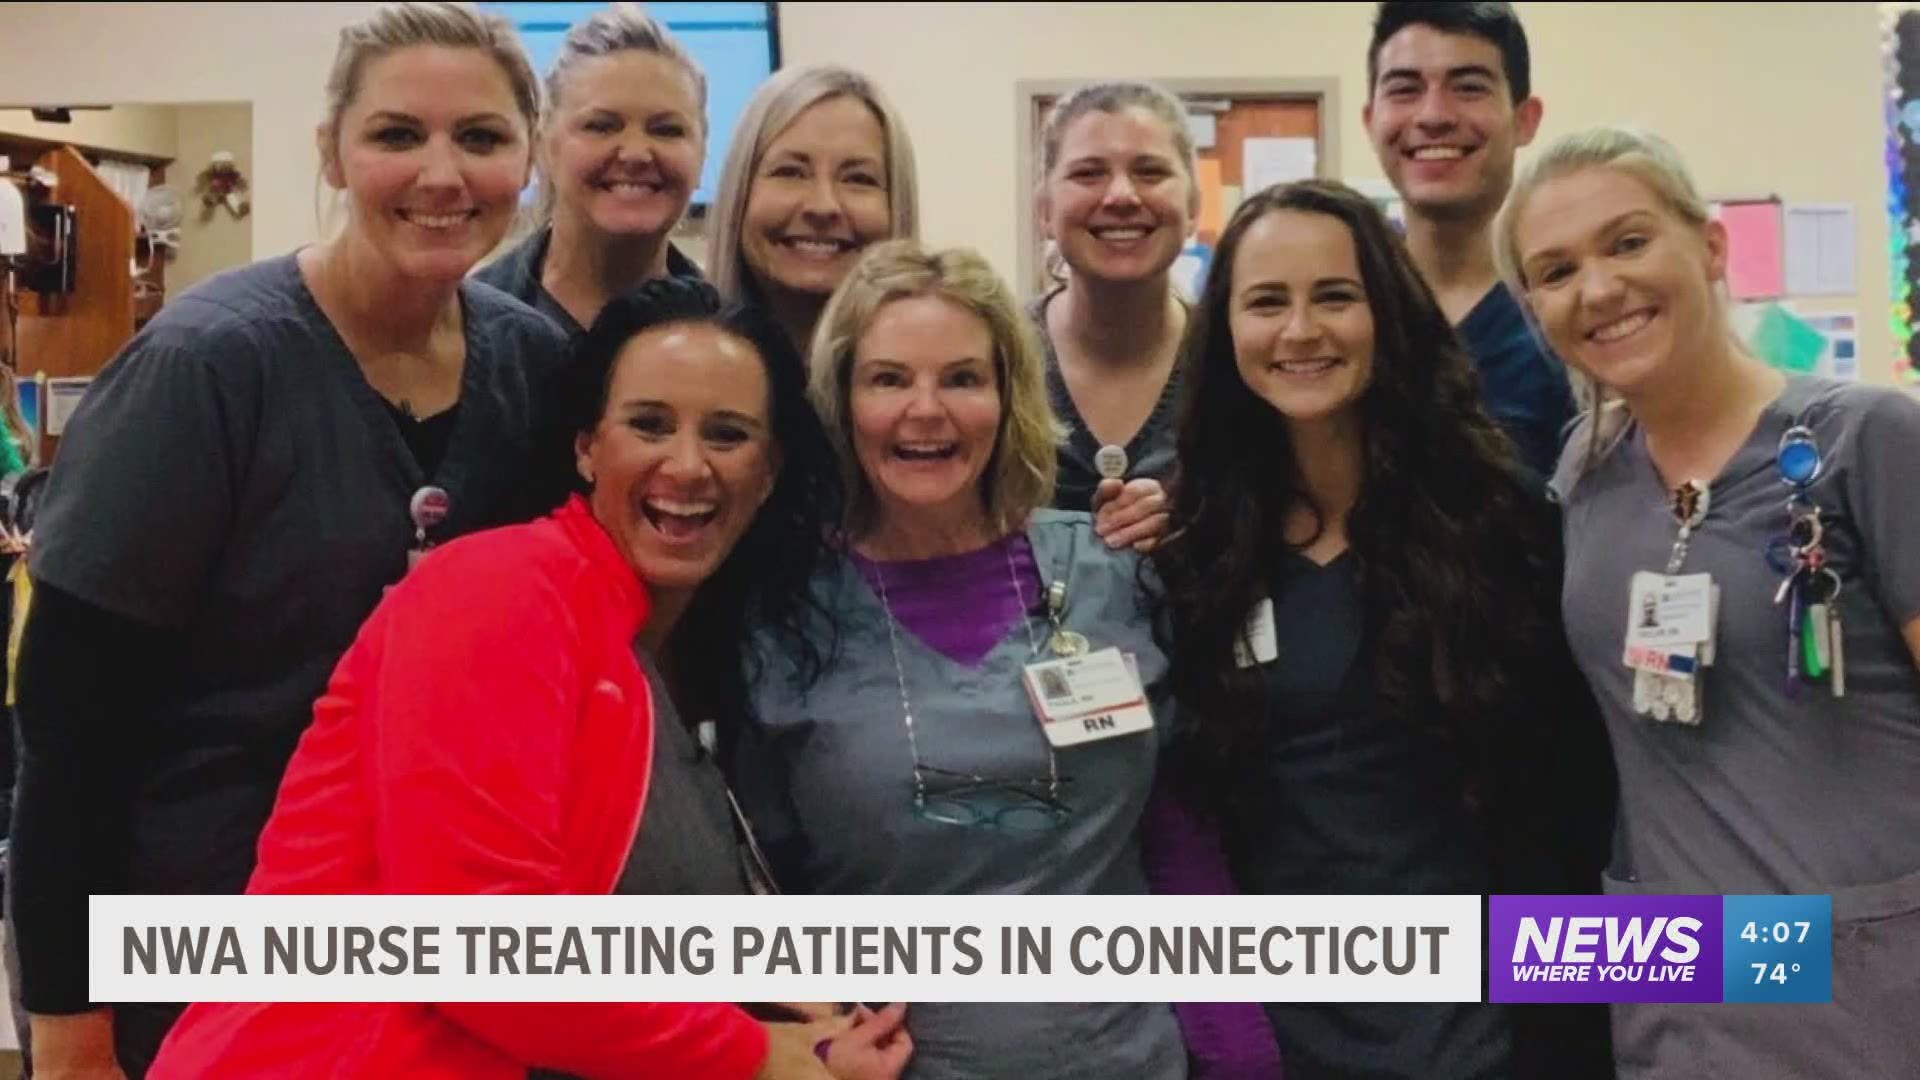 NWA nurse treating patients in Connecticut opens up about experience